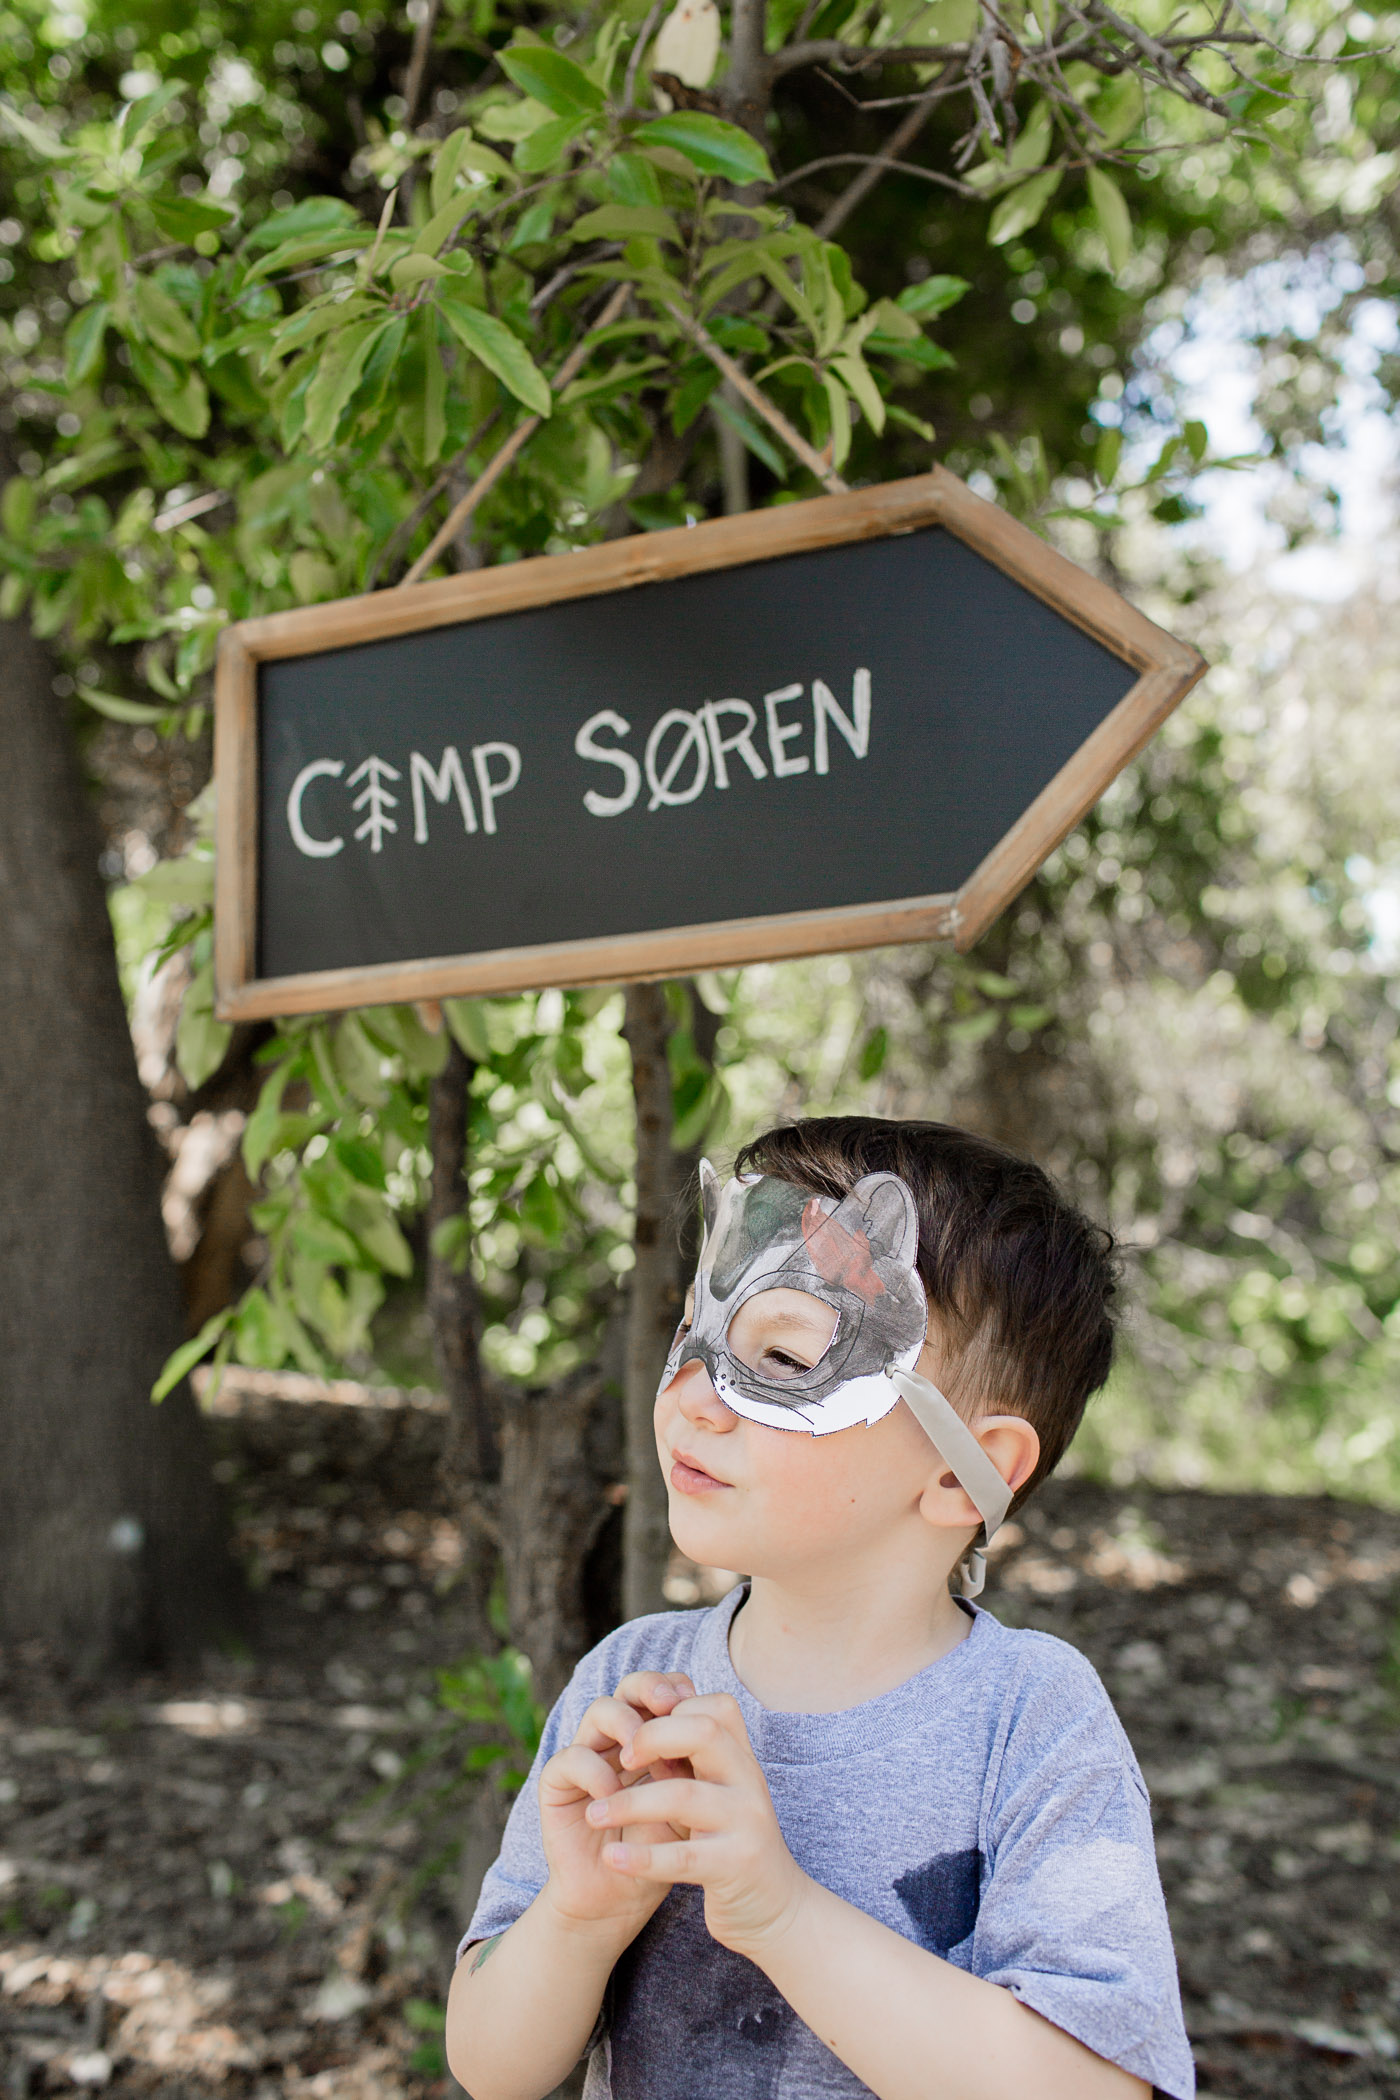 Camp Søren, a 4 year old's nature camp party.